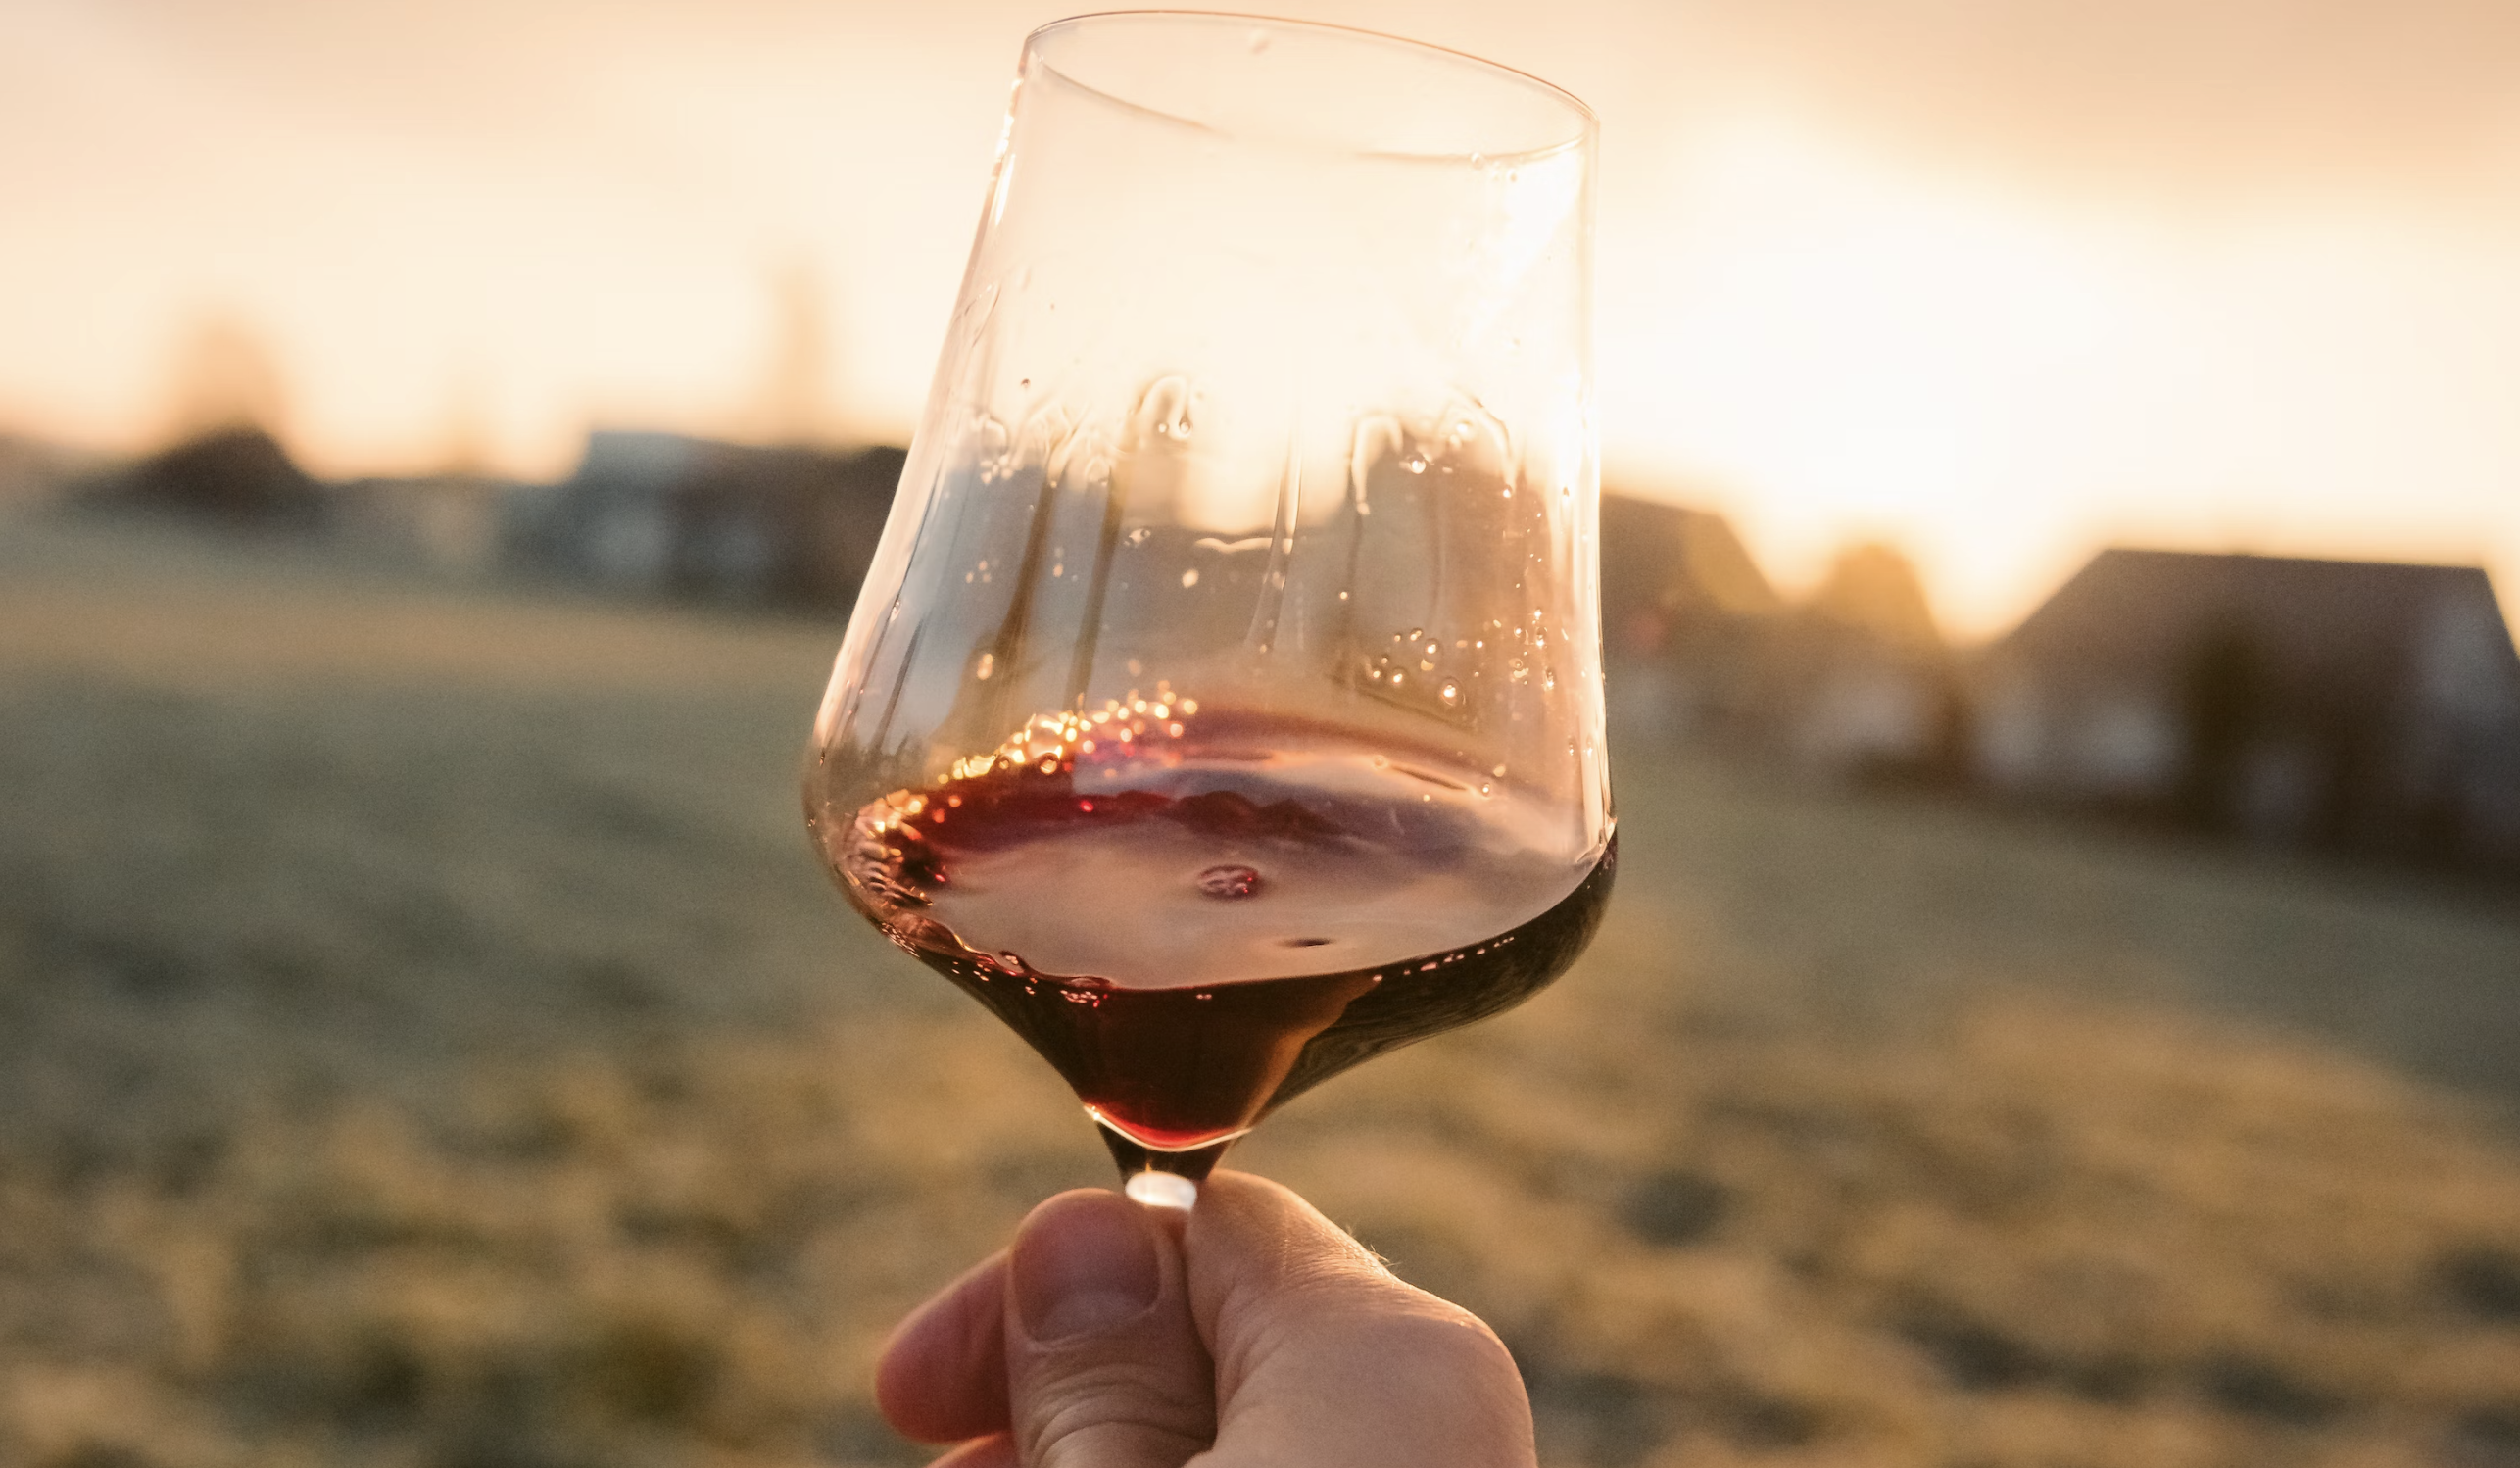 Sommelier Jaime Smith reveals the best wines for Springtime, treat yourself and save money.